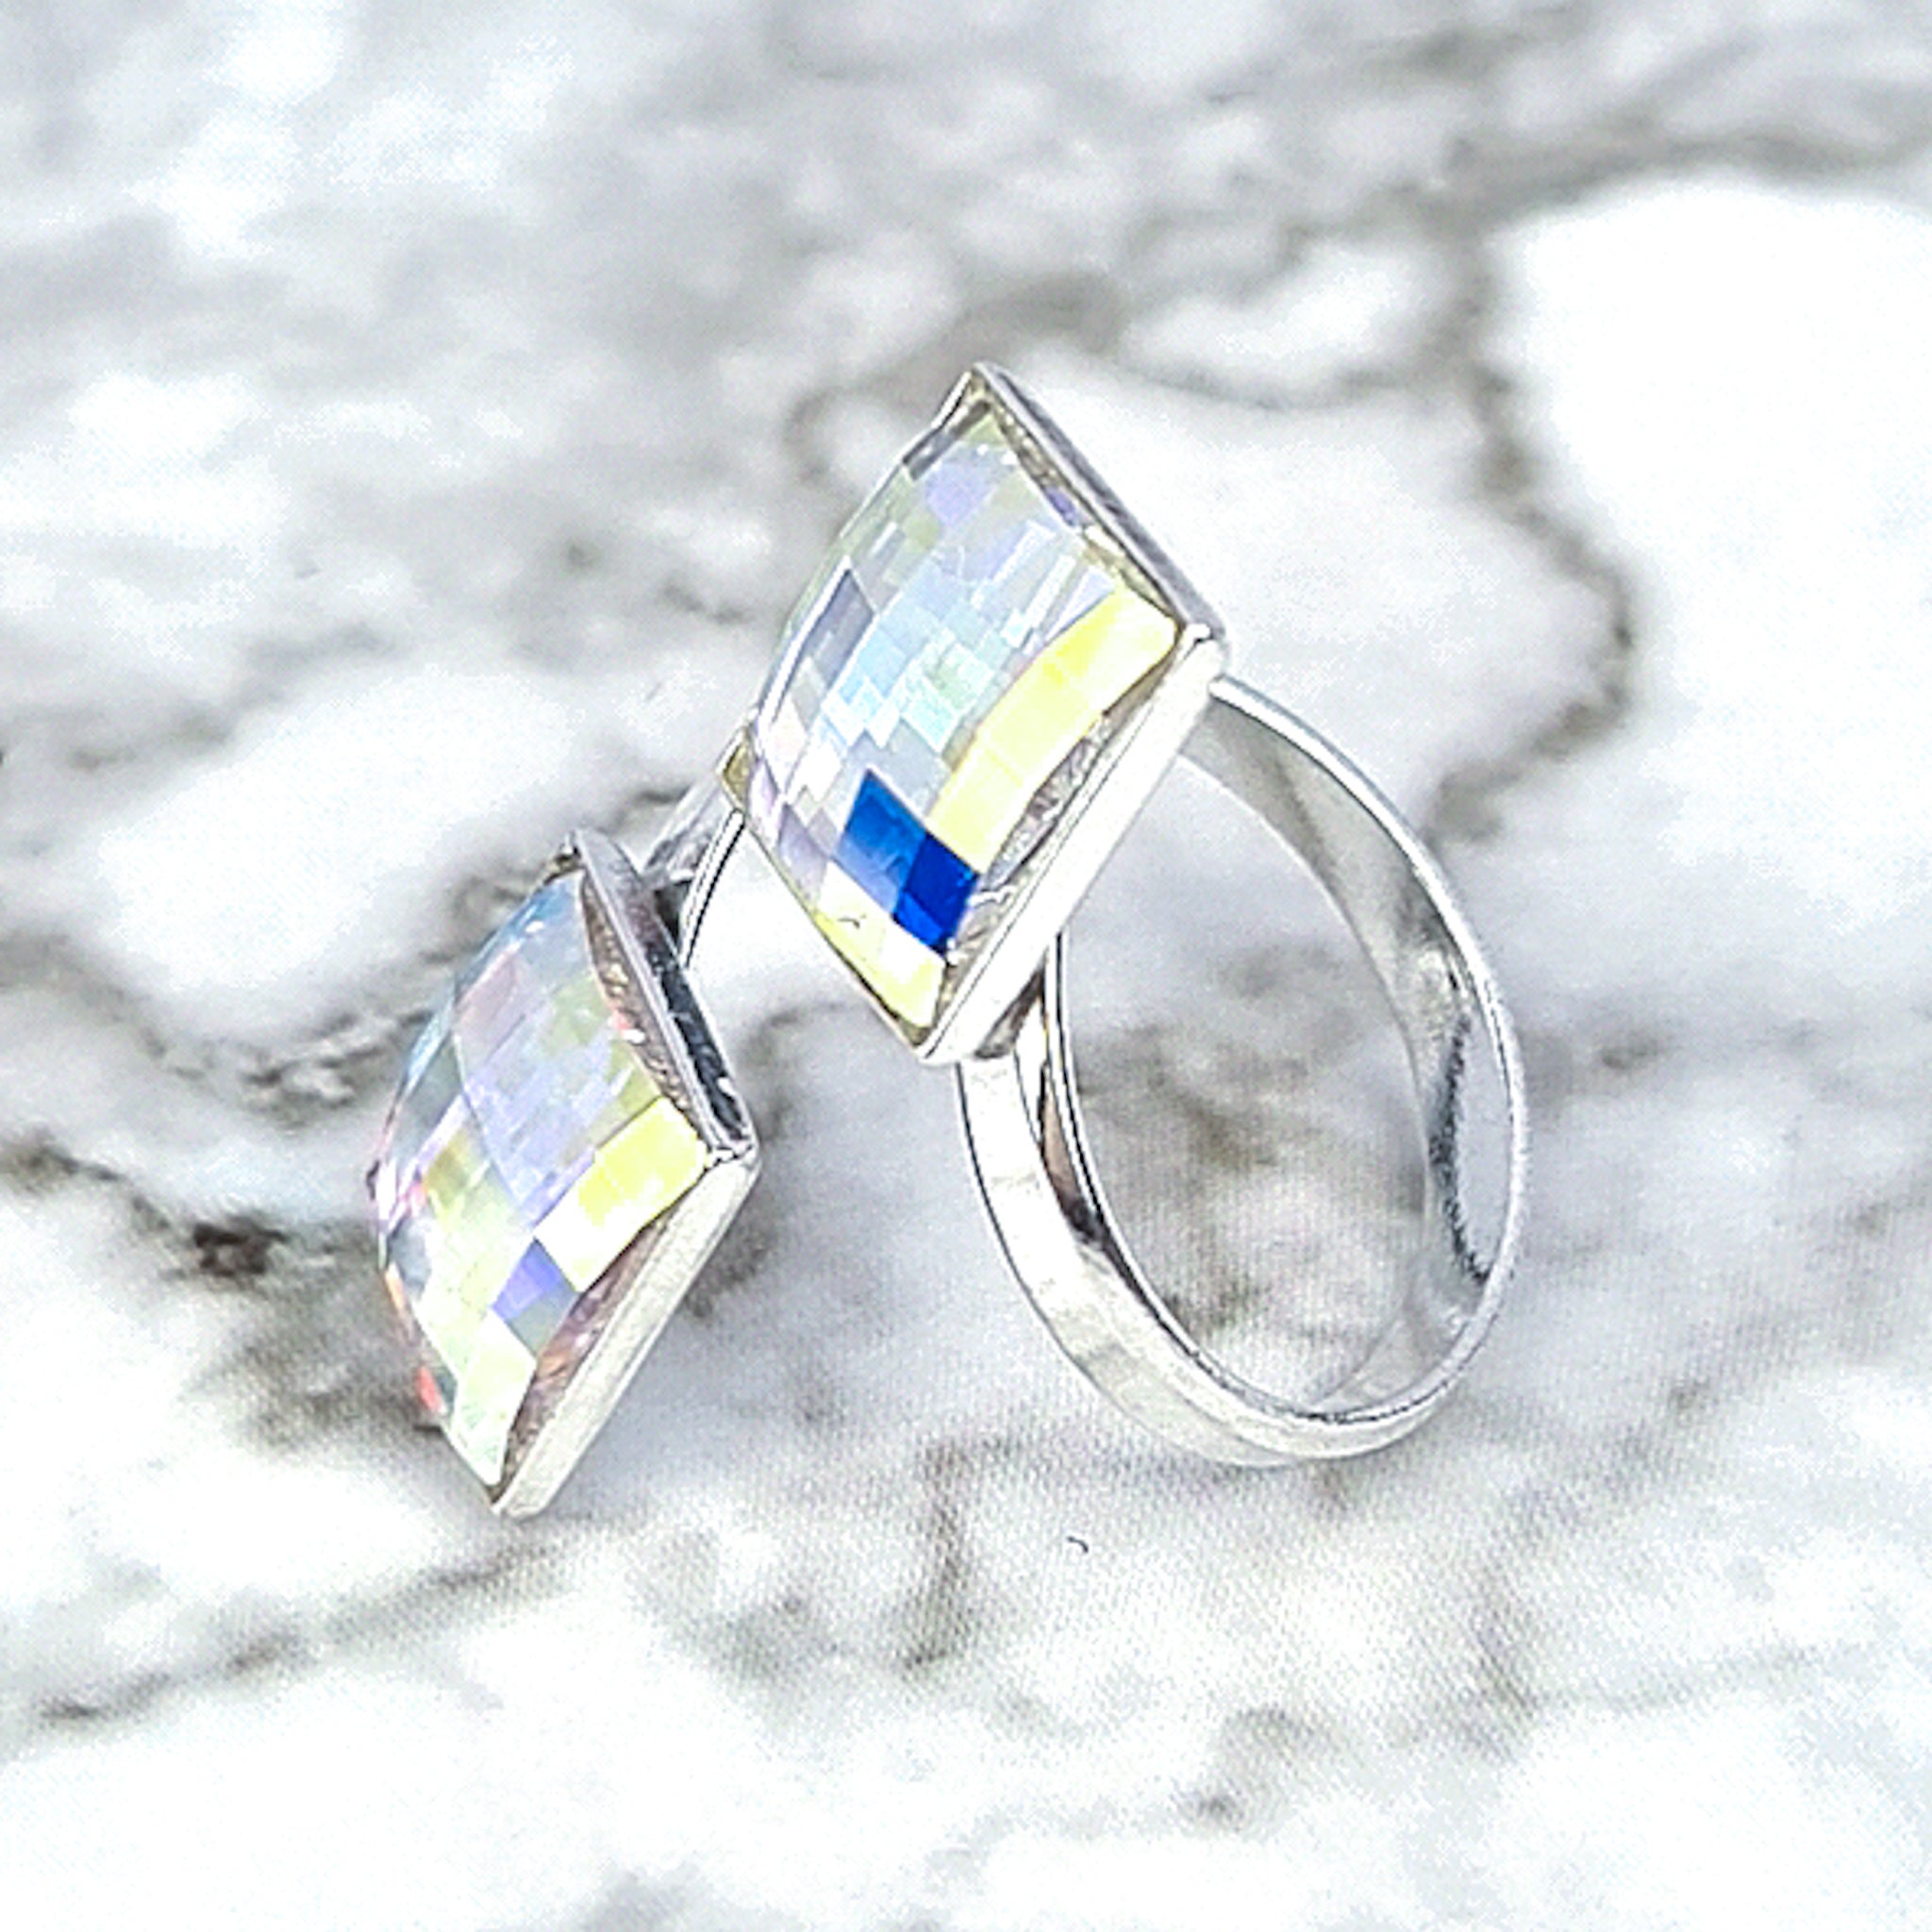 Close-up image of the Glittering Chessboard Wrap Ring, showcasing the wrap-around design and two square crystals in aurora borealis finish.

Side view of the ring